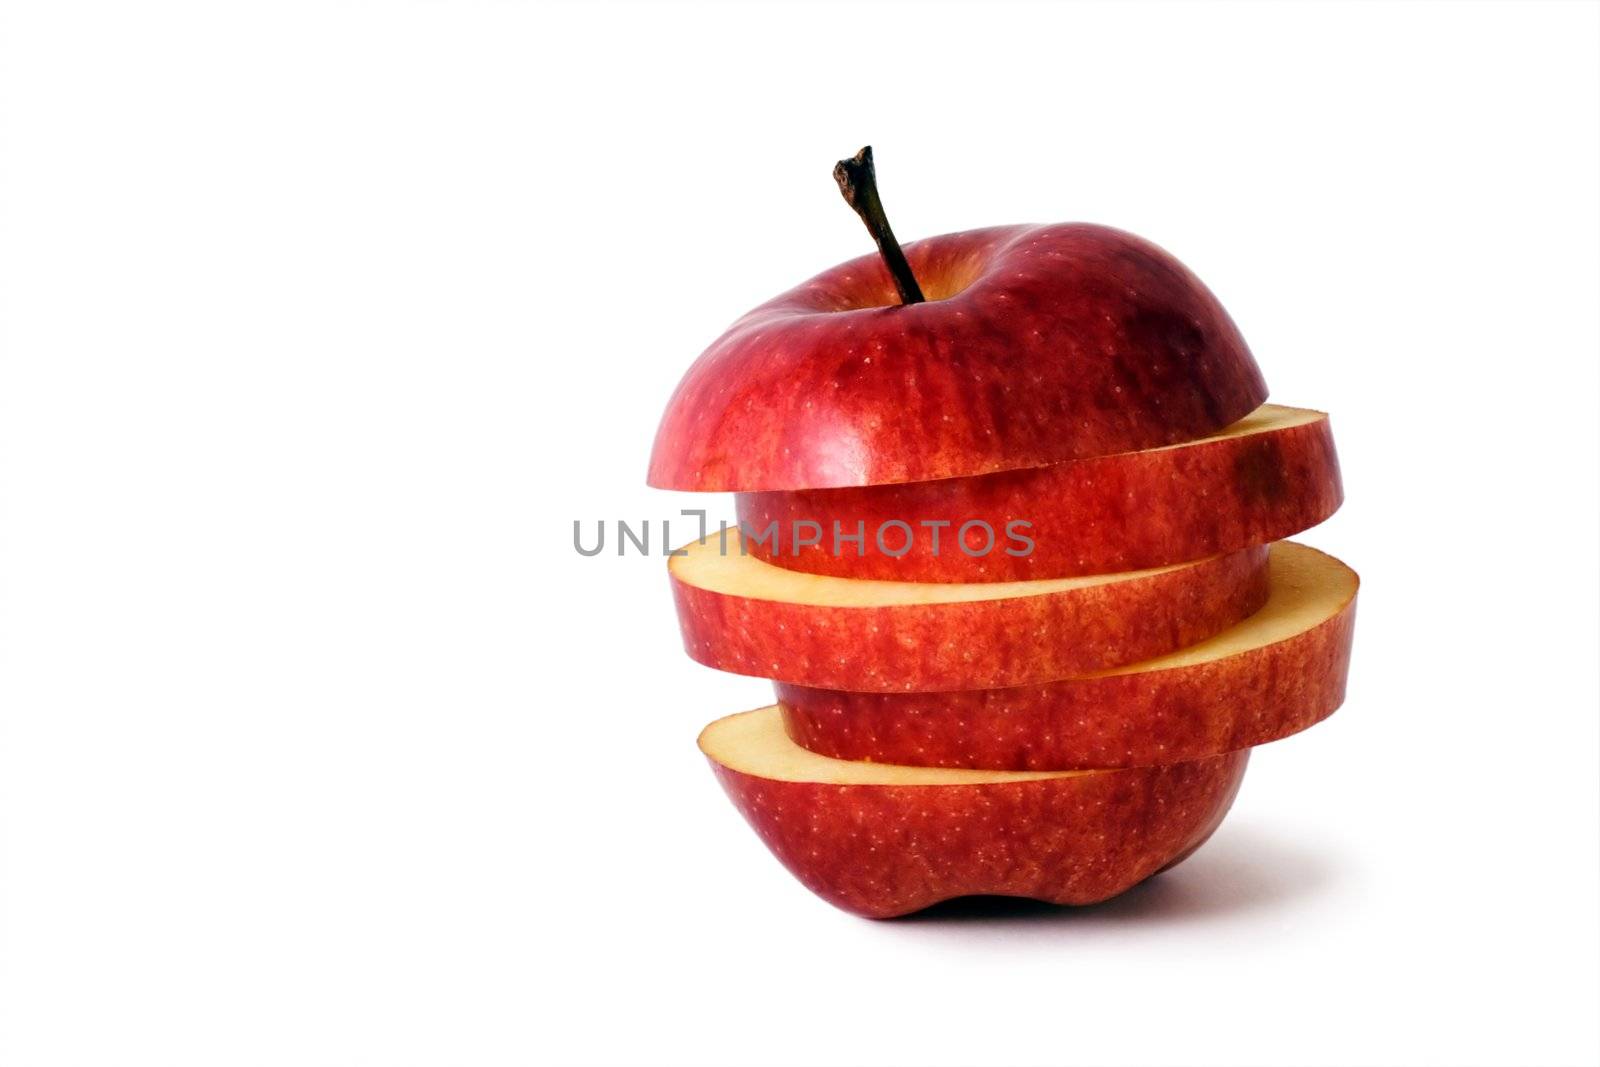 slices of an apple put together to form a hybrid fruit, shot on white in a studio